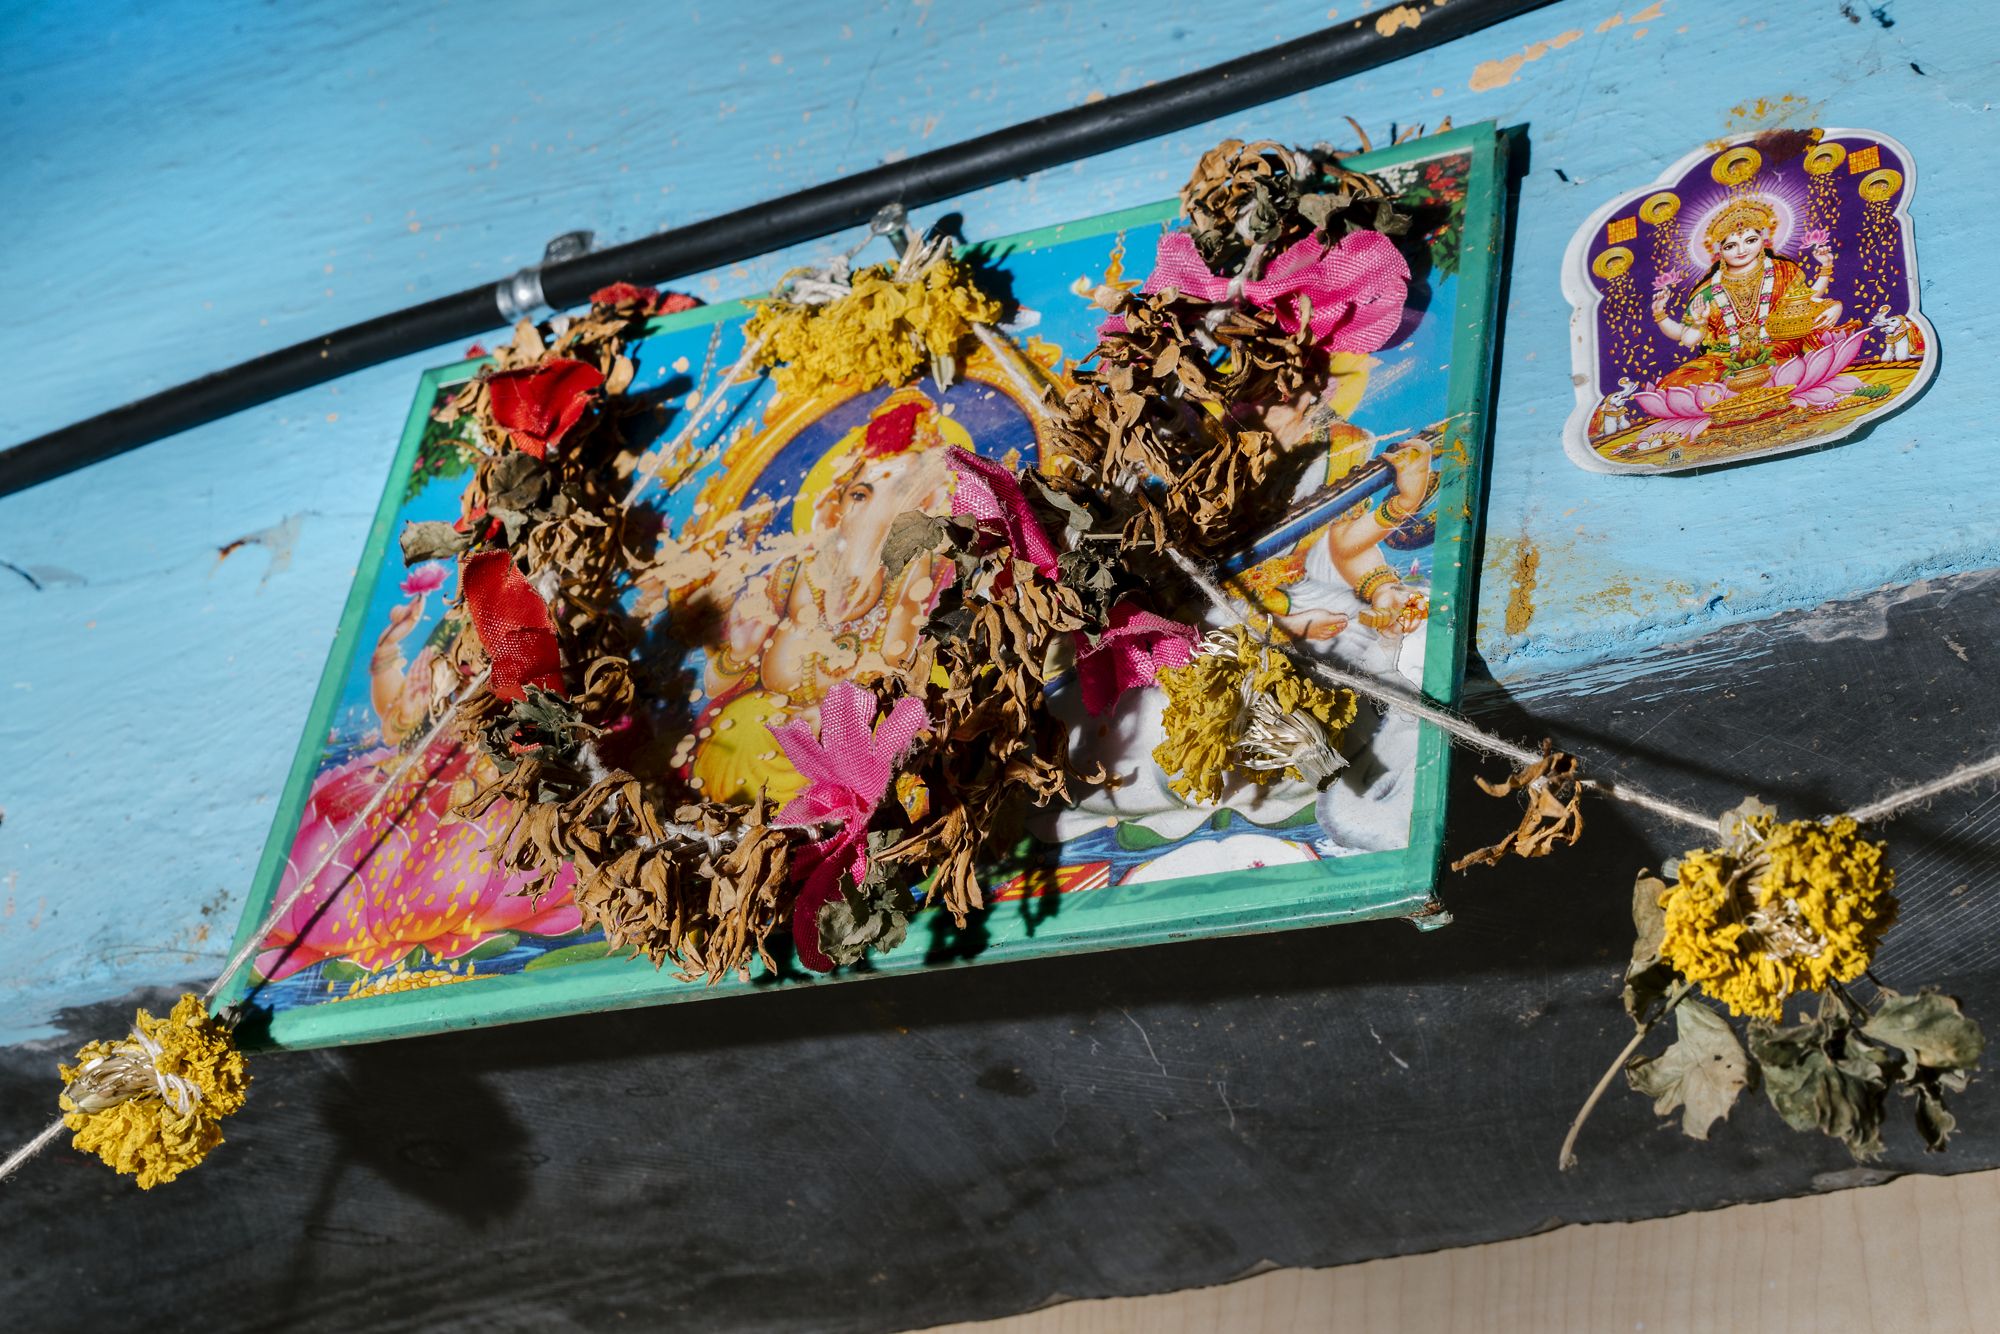 Garlands and images of deities hang over the doorway of an apartment in the Dharavi area of Mumbai, India. This particular part of Dharavi is home to many hijras, a formally recognized third gender in India. Image by Jake Naughton and Aarti Singh. India, 2018.